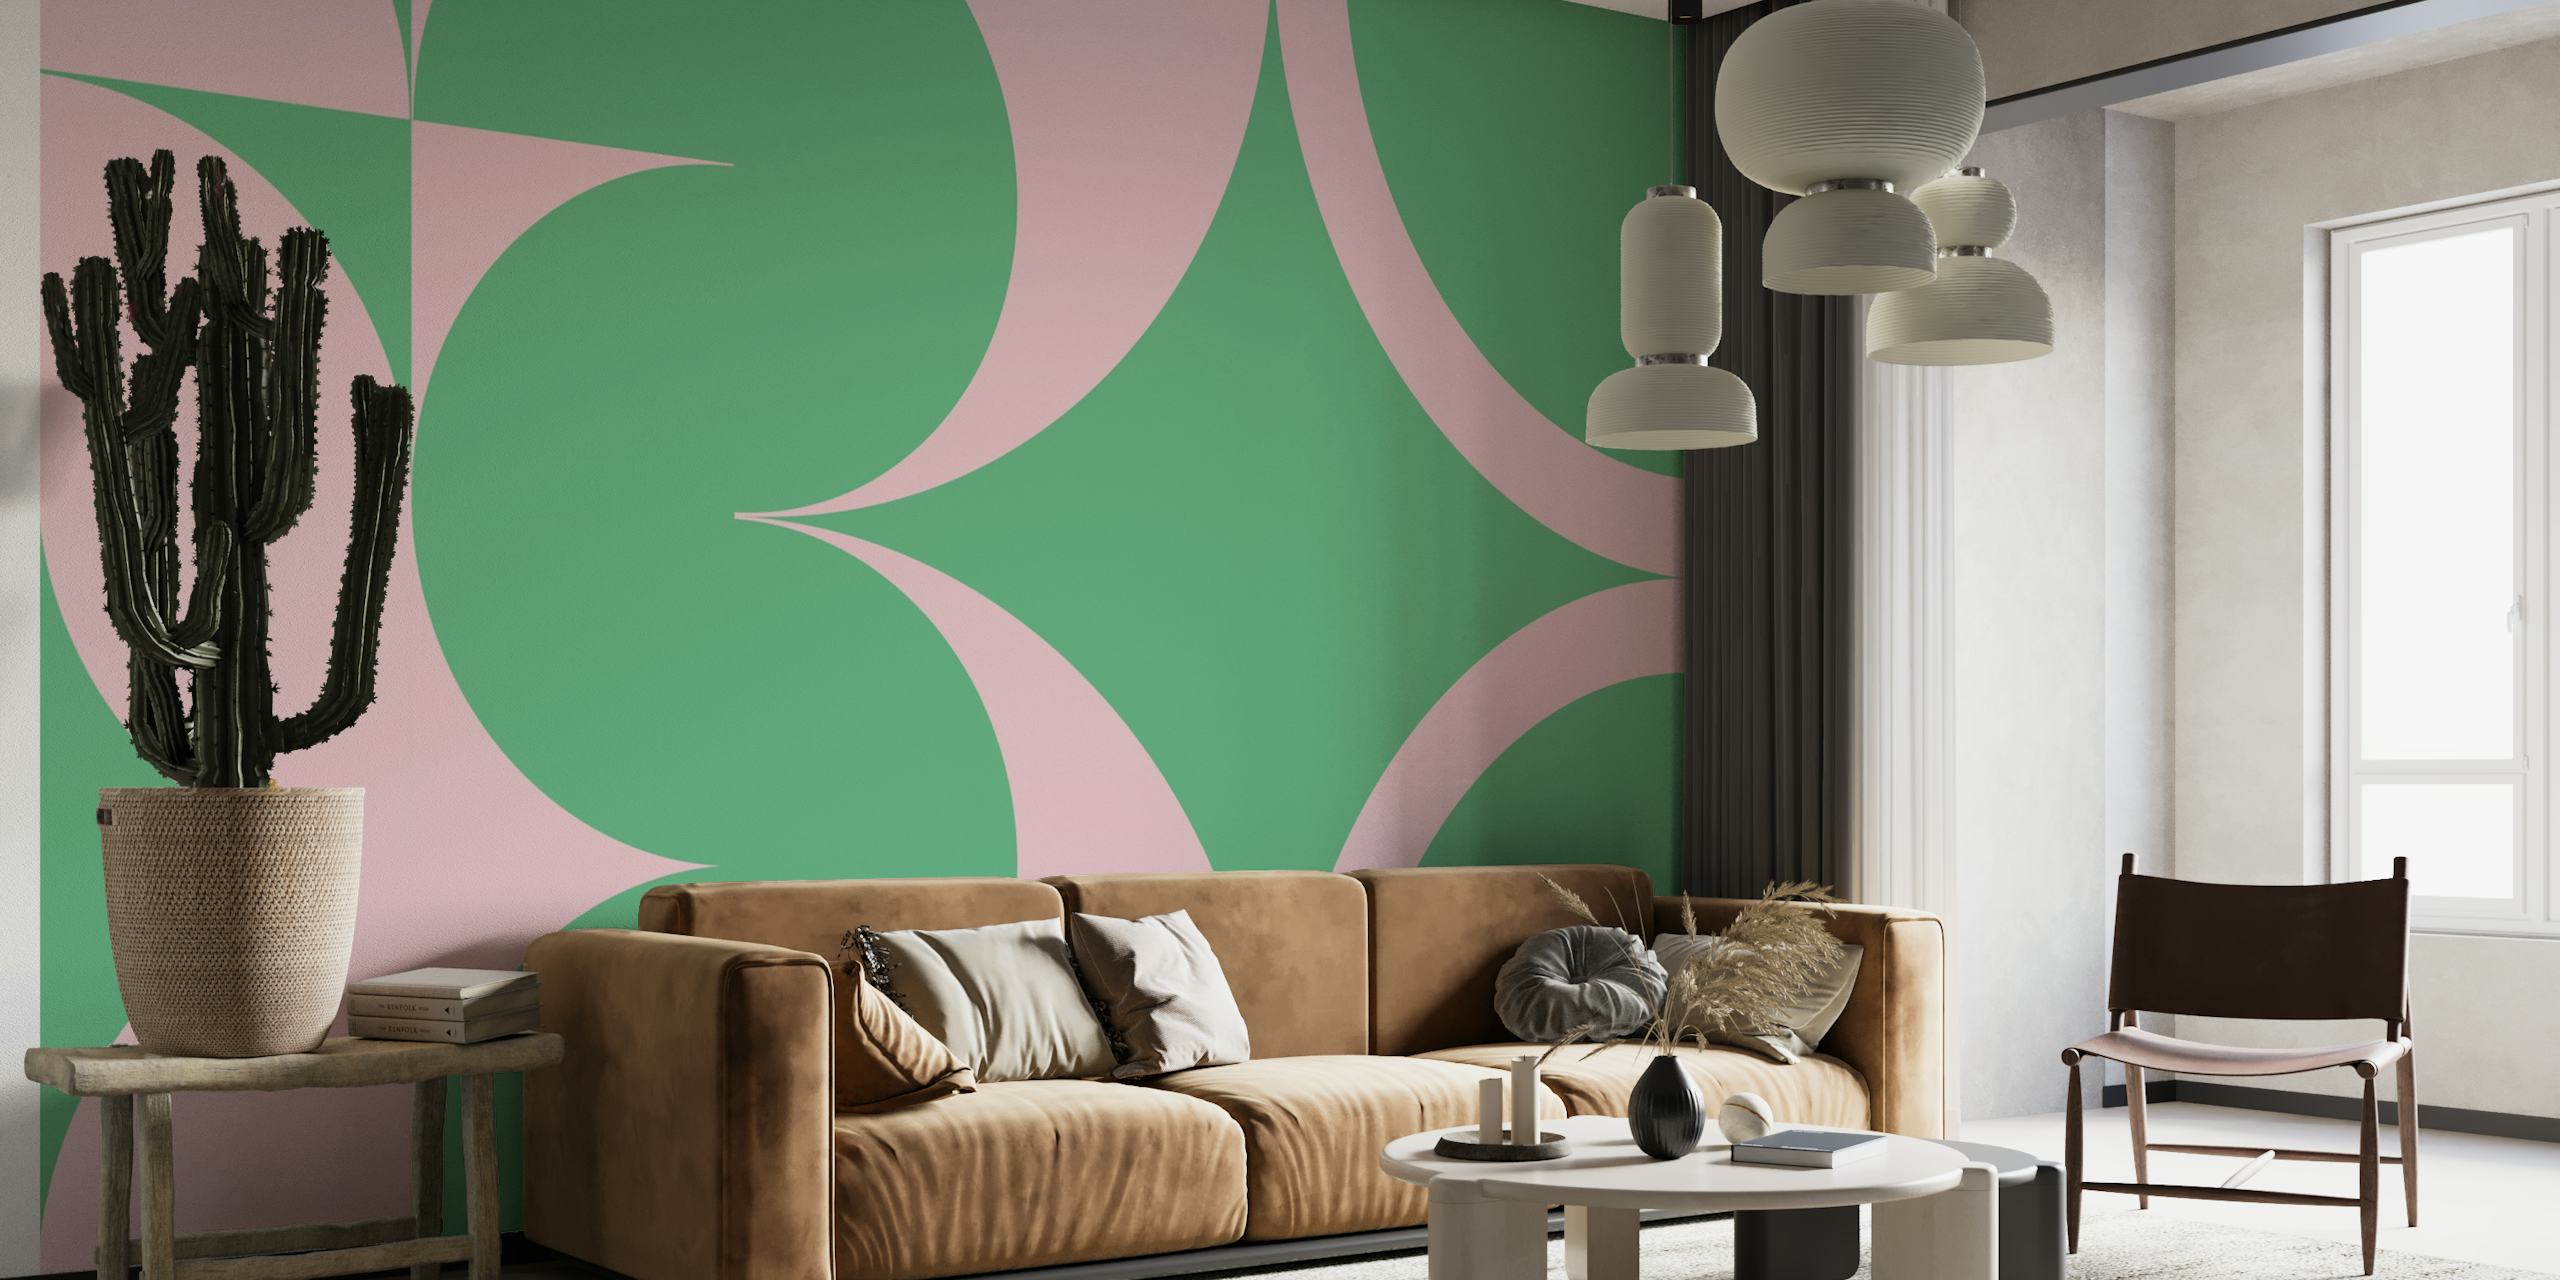 Green and Pink Mid Century Modern Geometric Pattern Wall Mural